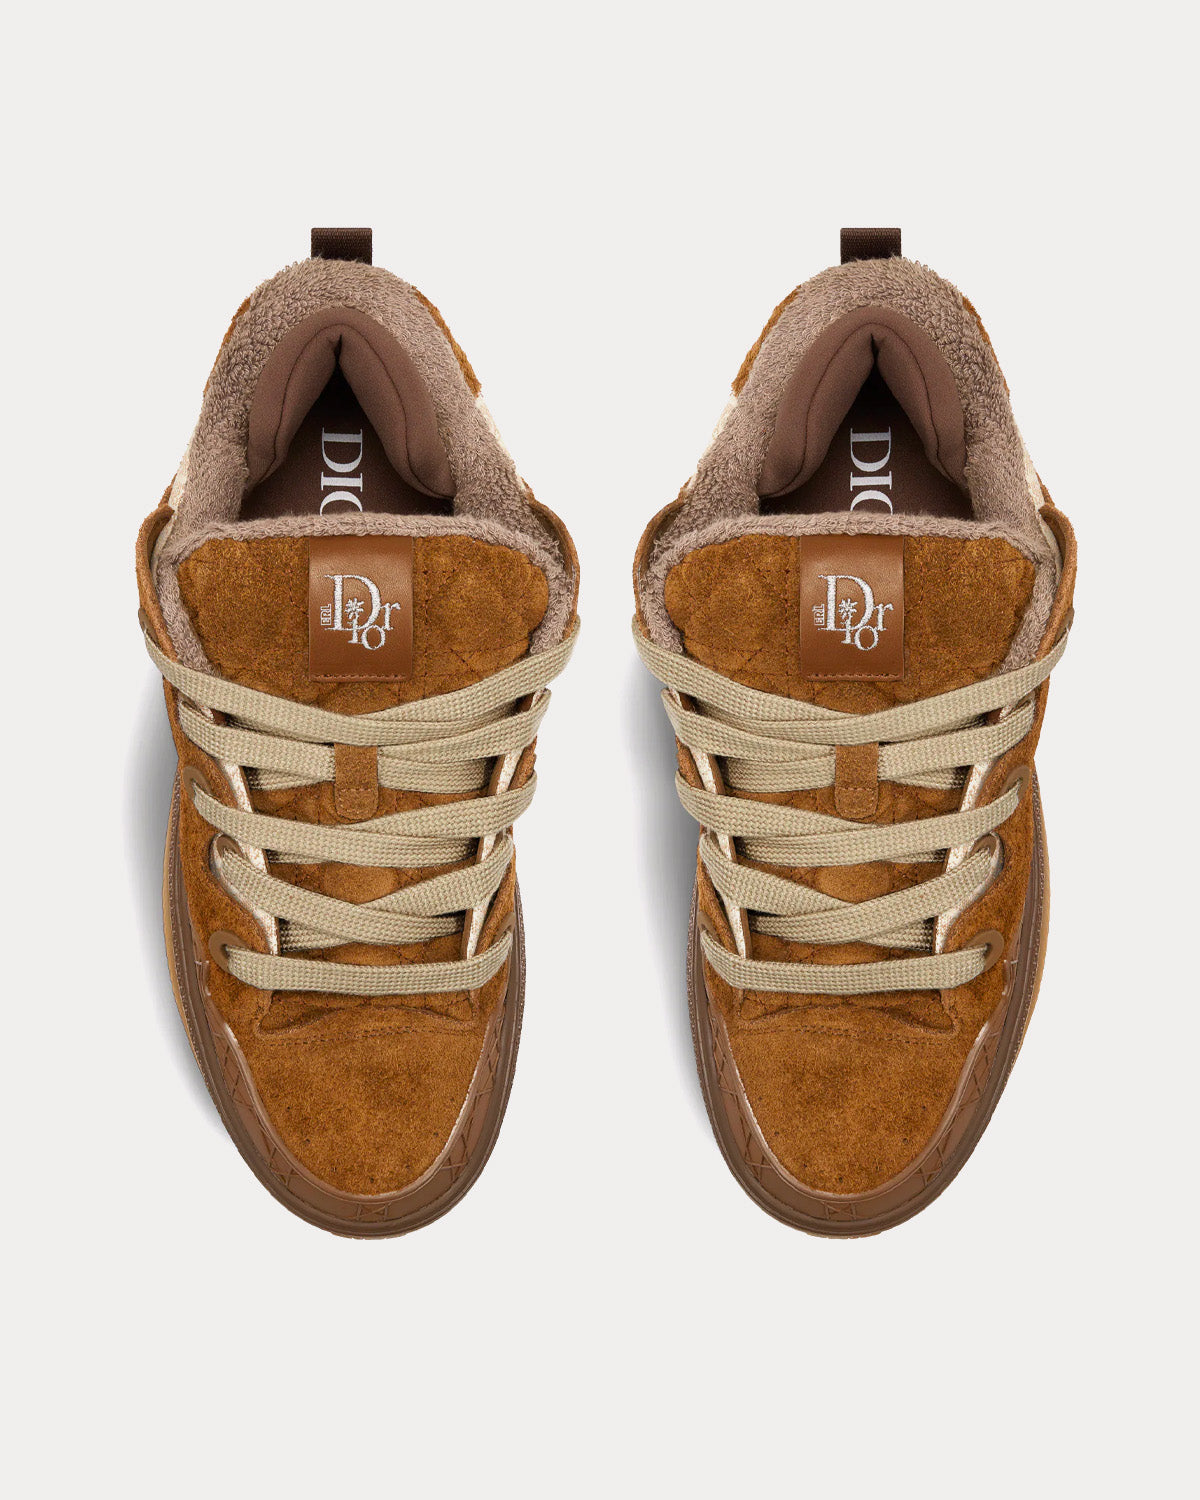 Dior x ERL - B9S Skater Limited And Numbered Edition Brown Suede with Brown and Beige Dior Oblique Jacquard Low Top Sneakers